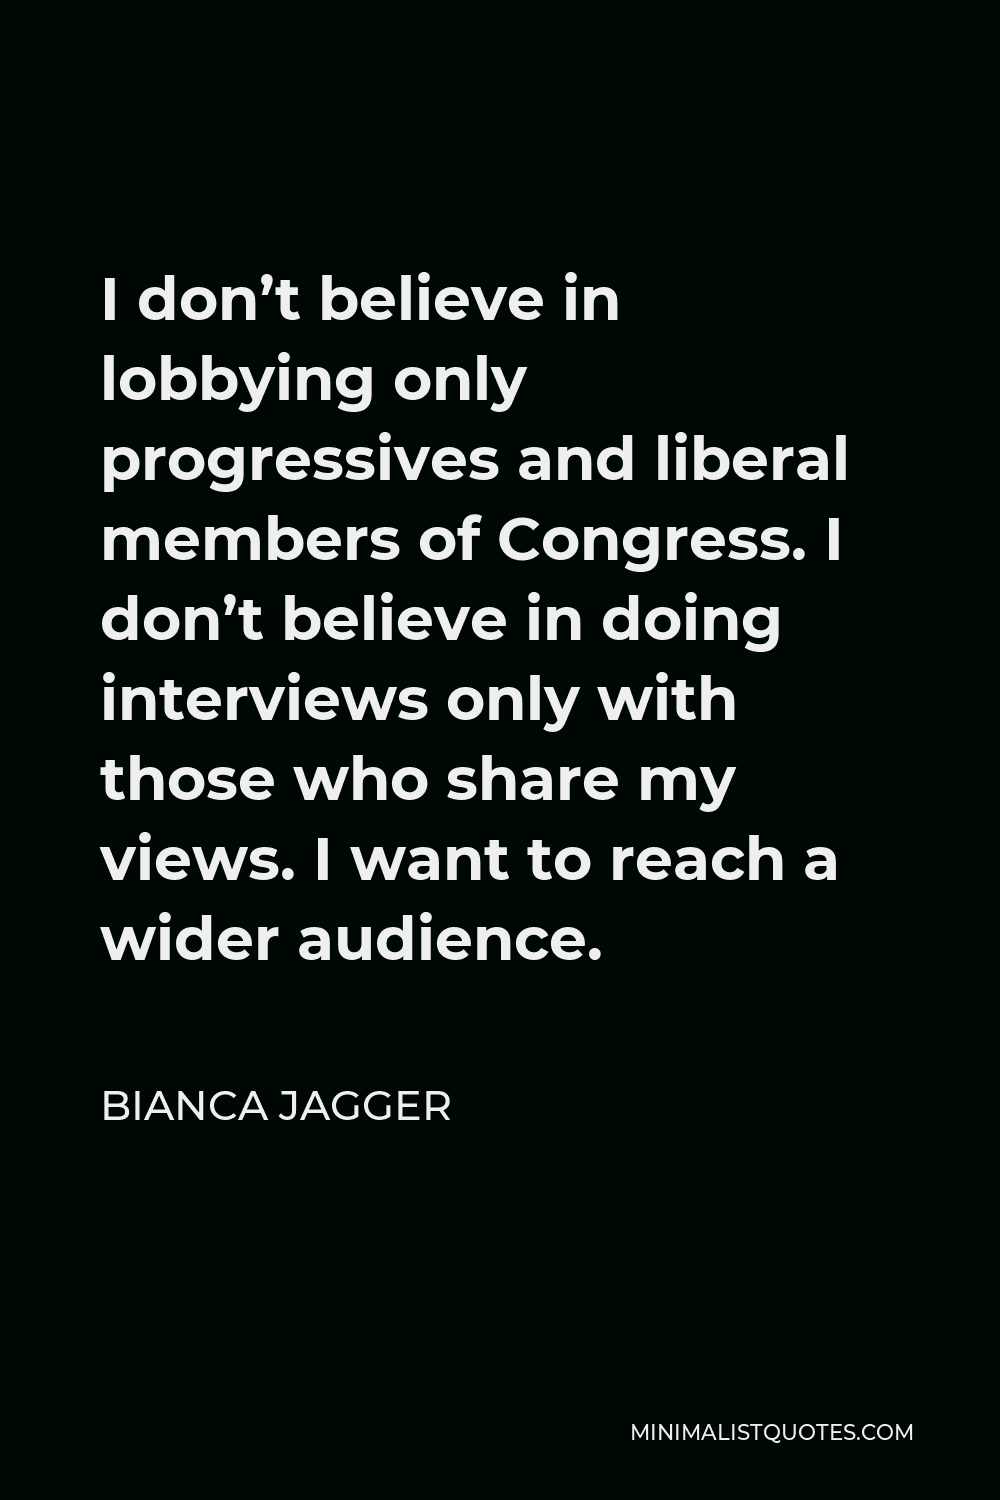 Bianca Jagger Quote - I don’t believe in lobbying only progressives and liberal members of Congress. I don’t believe in doing interviews only with those who share my views. I want to reach a wider audience.